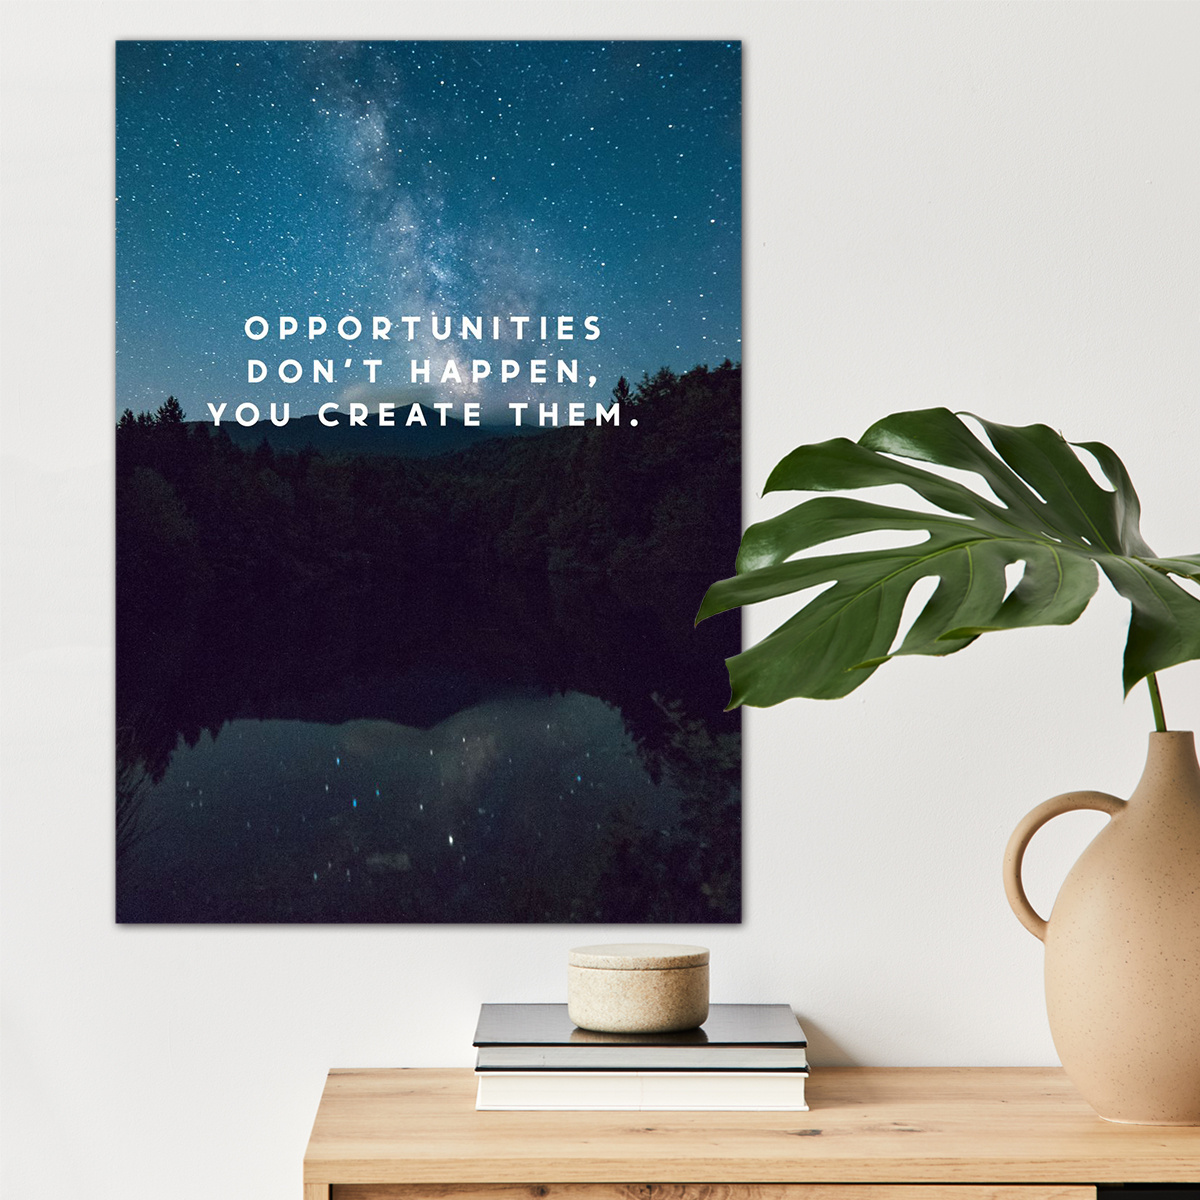 

1pc Opportunities Quote Poster Canvas Wall Art For Home Decor, Motivational Poster Wall Decor High Quality Canvas Prints For Living Room Bedroom Kitchen Office Cafe Decor, Perfect Gift And Decoration